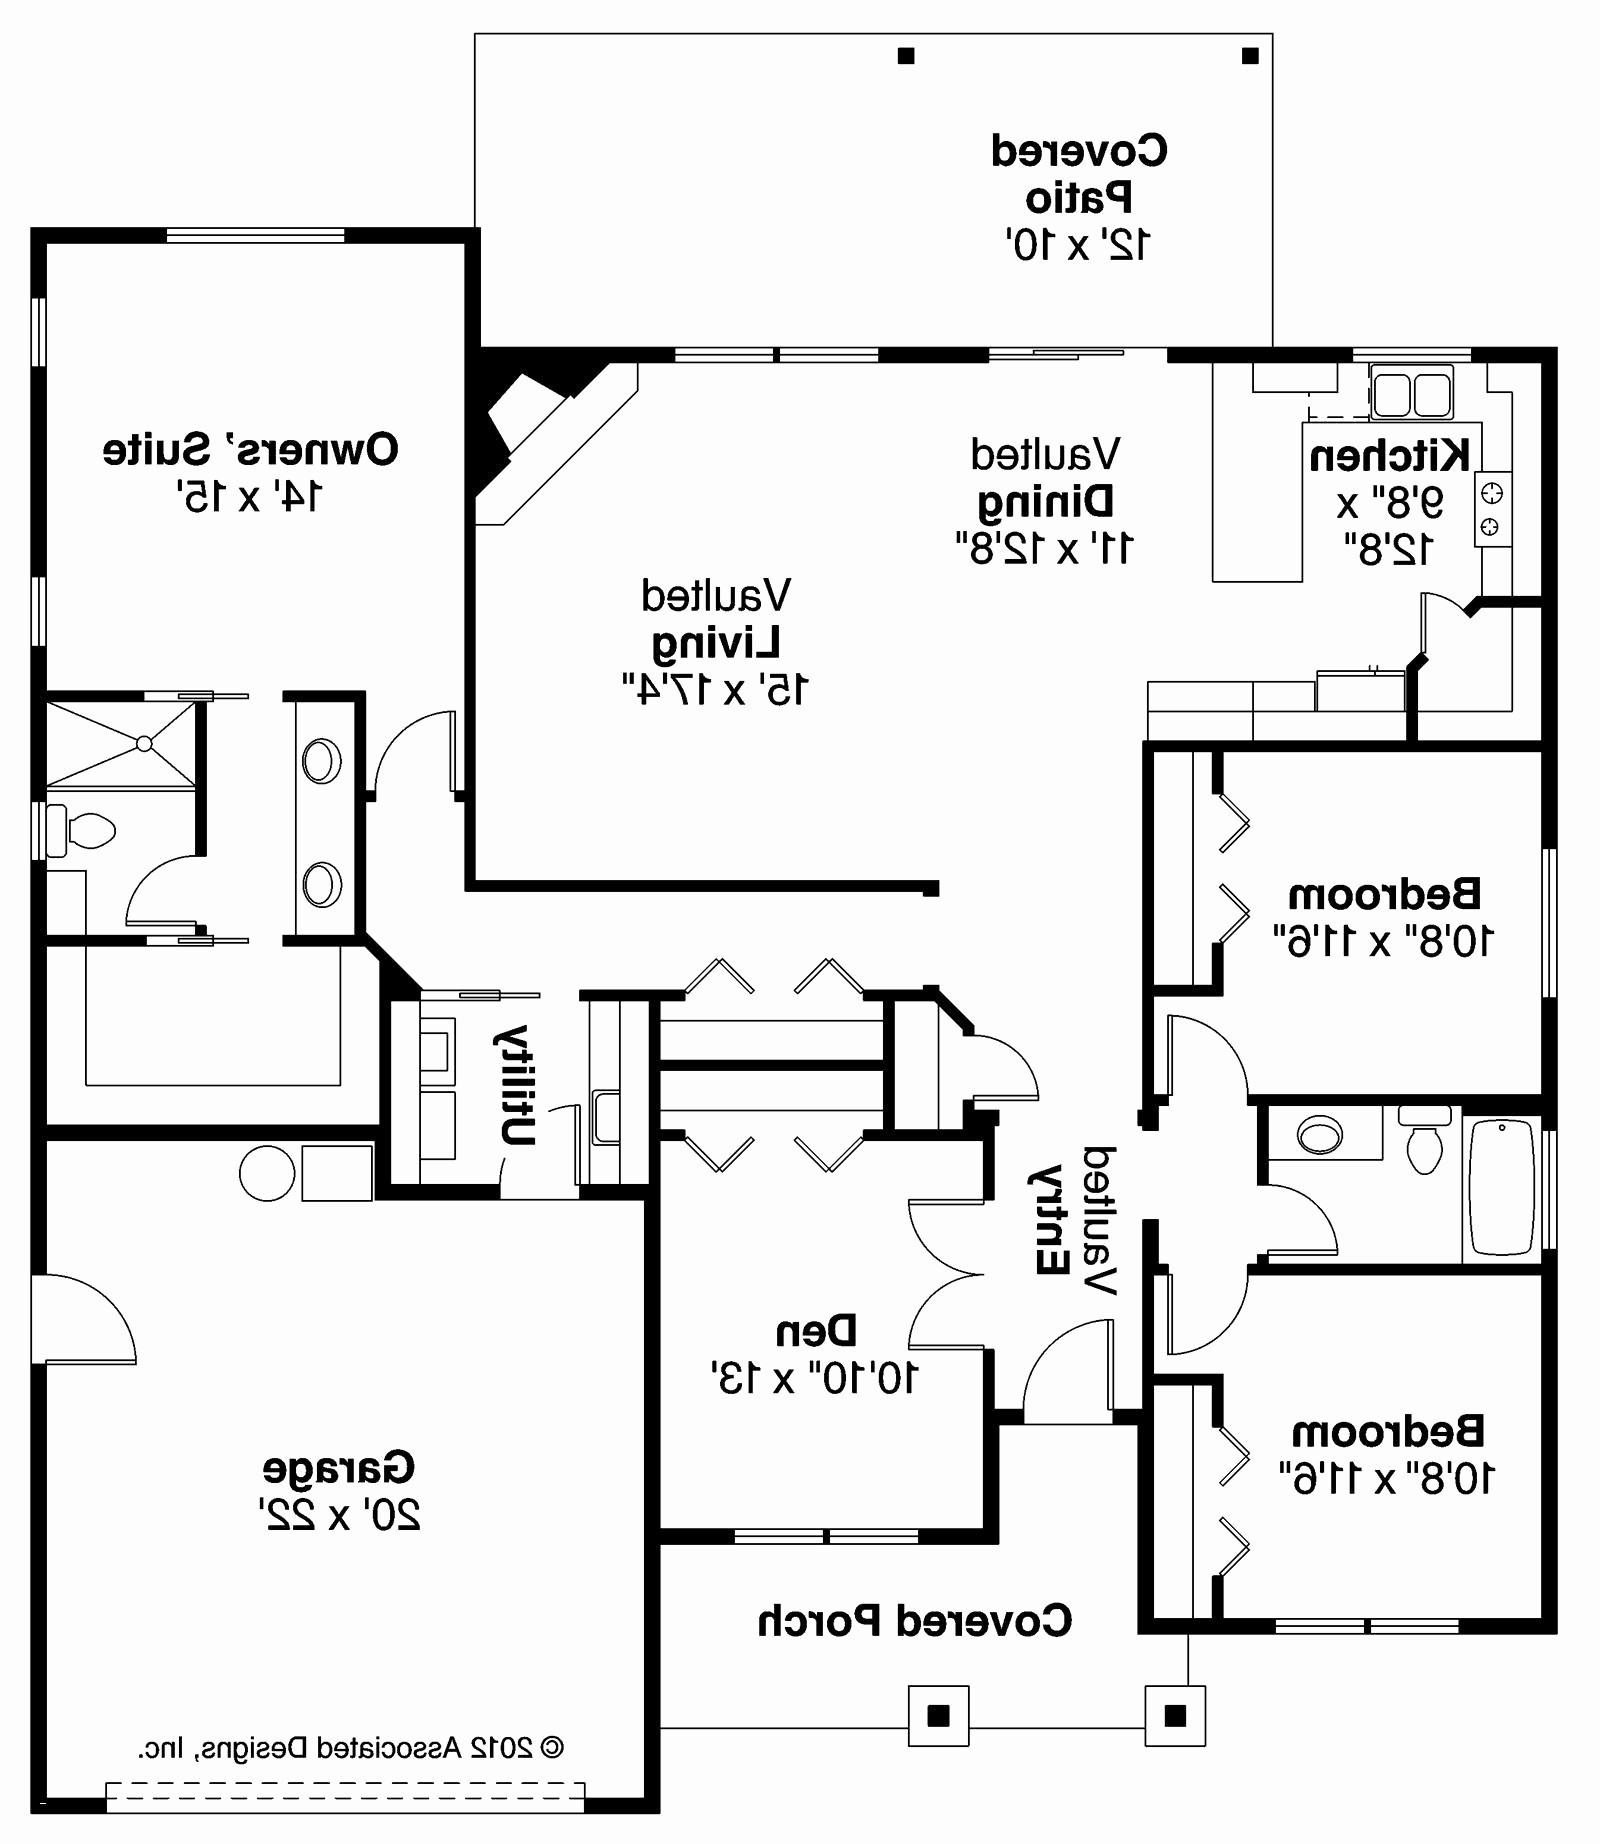 House Wiring Diagram Unique House Wiring Diagram Electrical Floor Plan 2004 2010 Bmw X3 E83 3